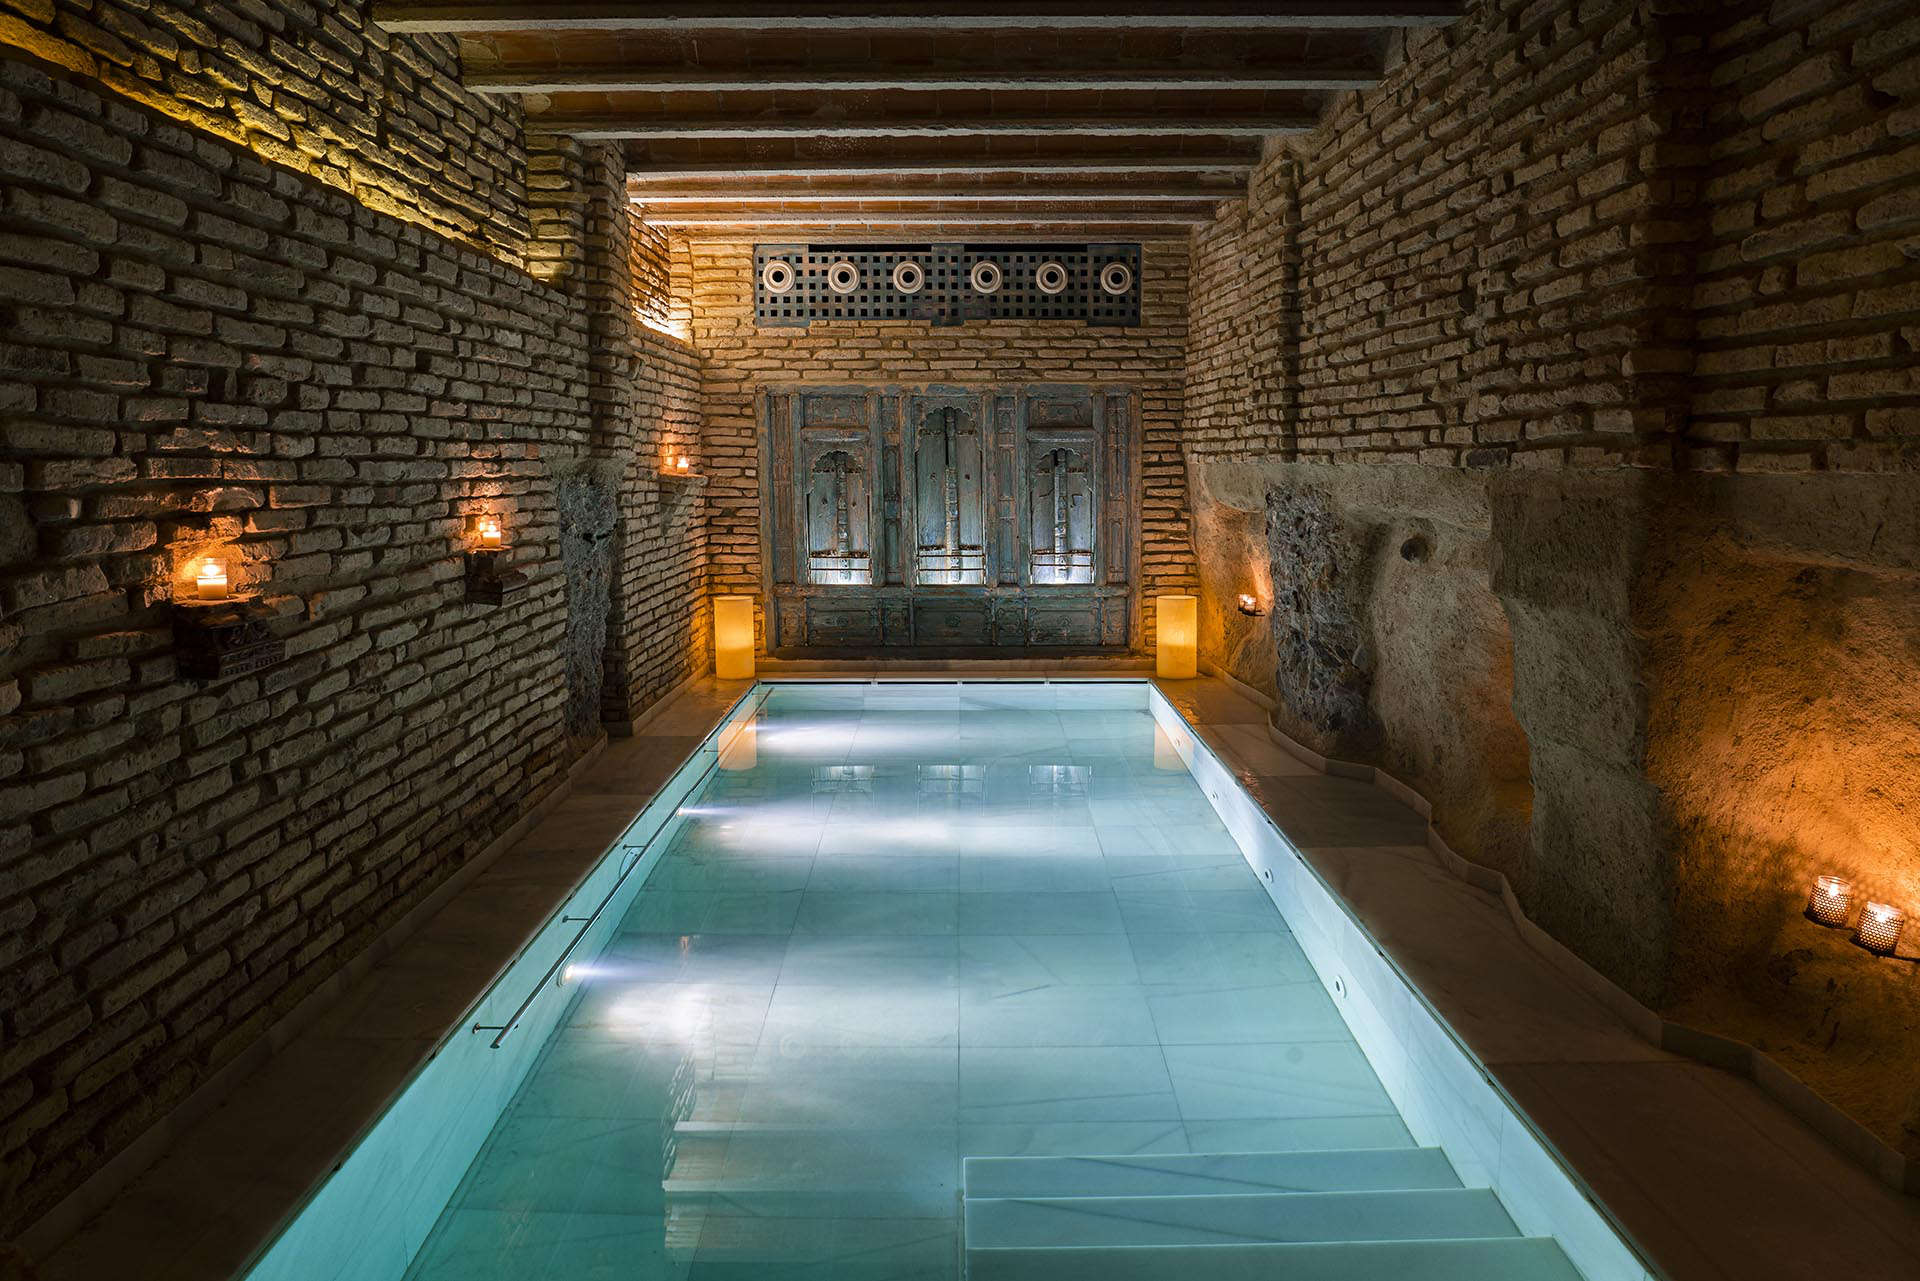 a blue spa pool underground with brick walls,  and candles at the sides.